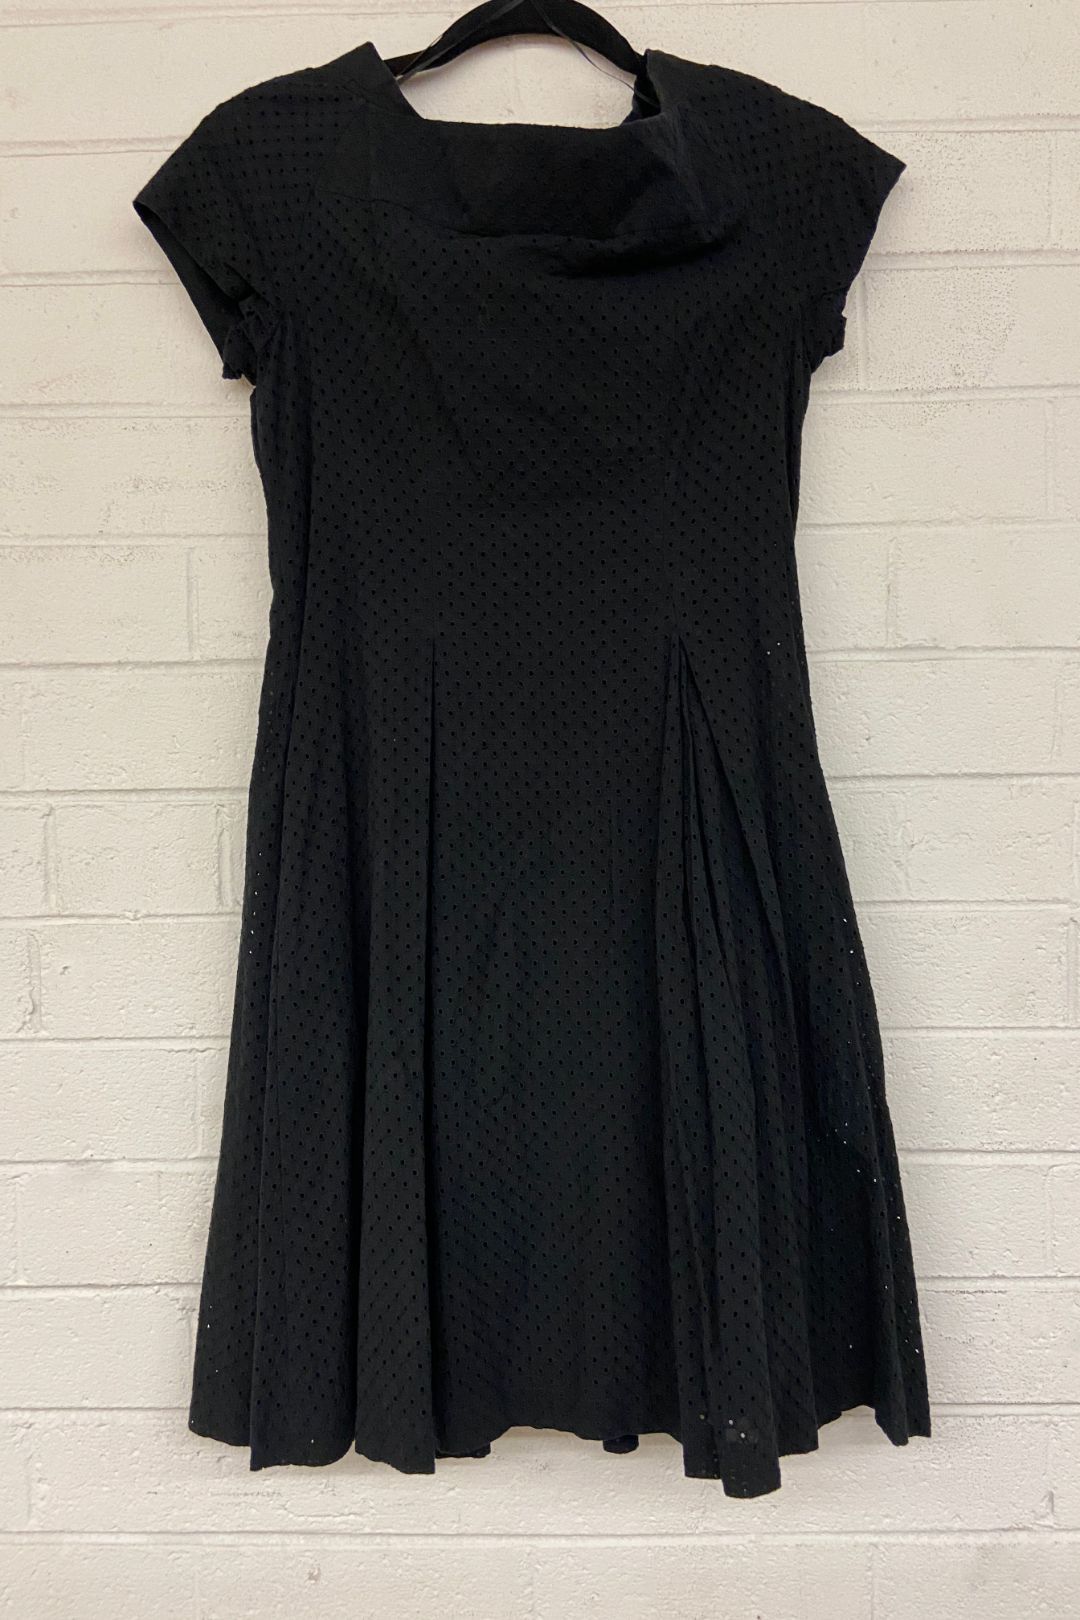 Zip Front Fit and Flare Black Dress